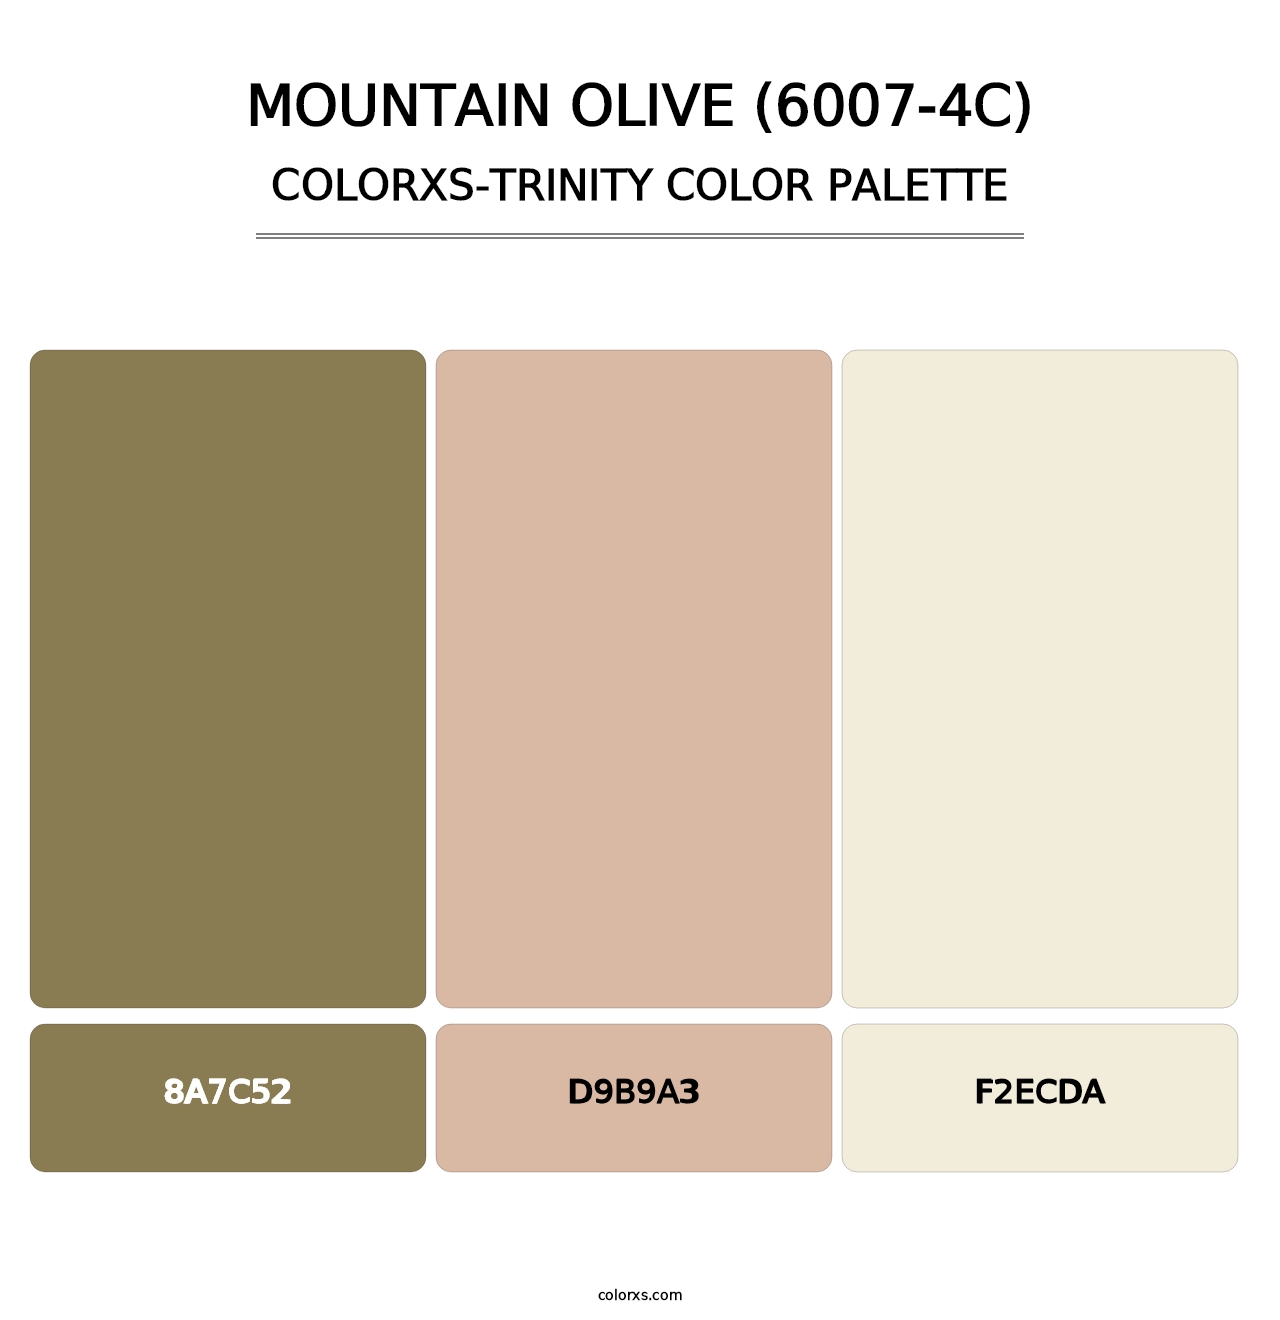 Mountain Olive (6007-4C) - Colorxs Trinity Palette